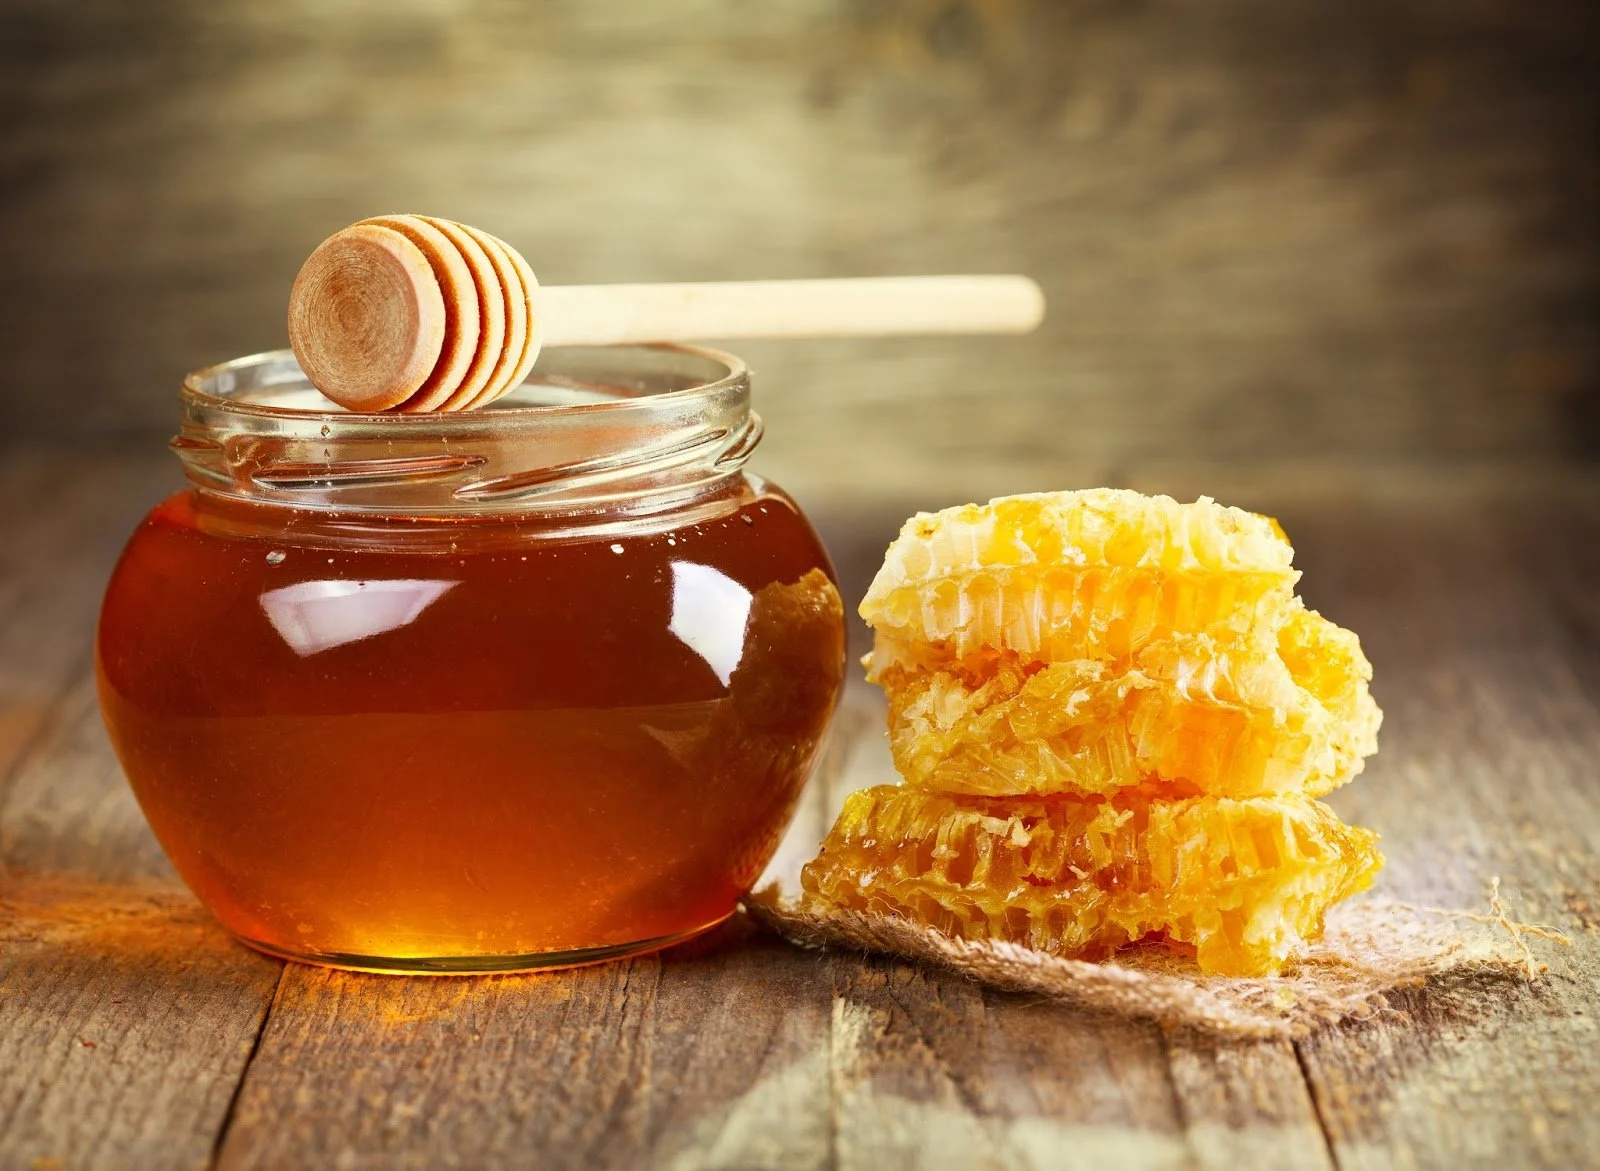 Health Benefits of Honey and Other Foods